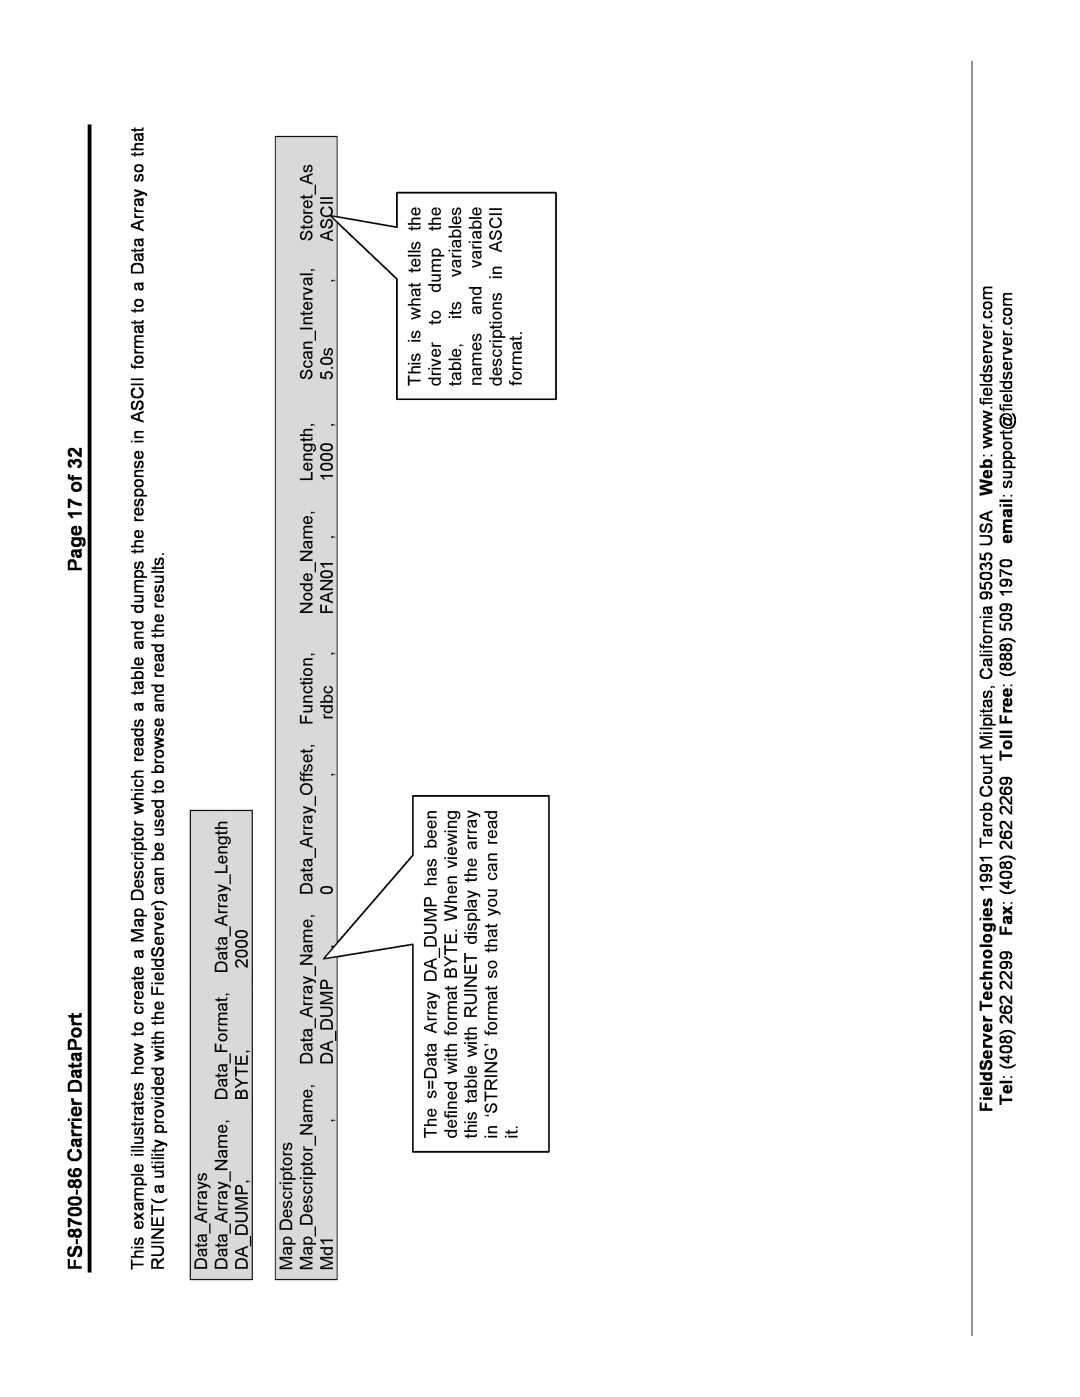 FieldServer instruction manual Page 17 of, FS-8700-86 Carrier DataPort 